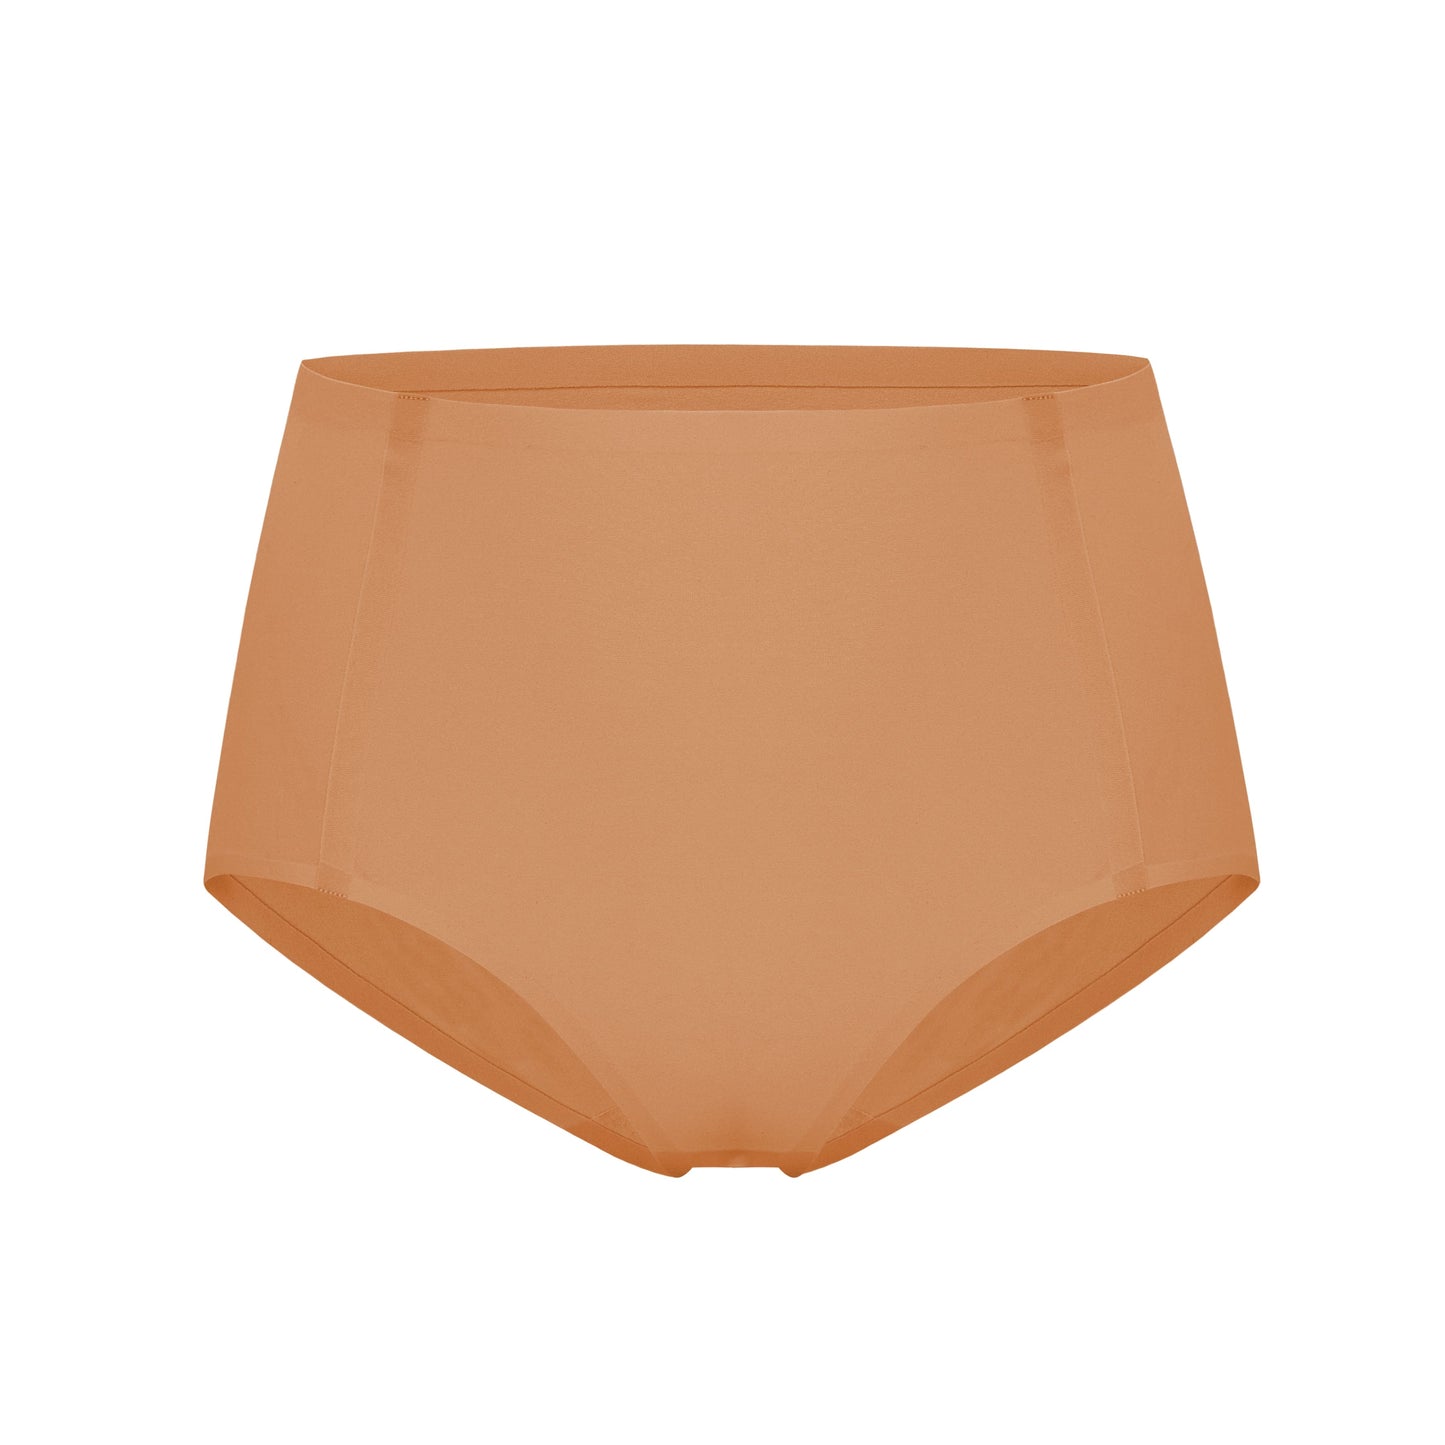 flat lay image of tanned orange brief